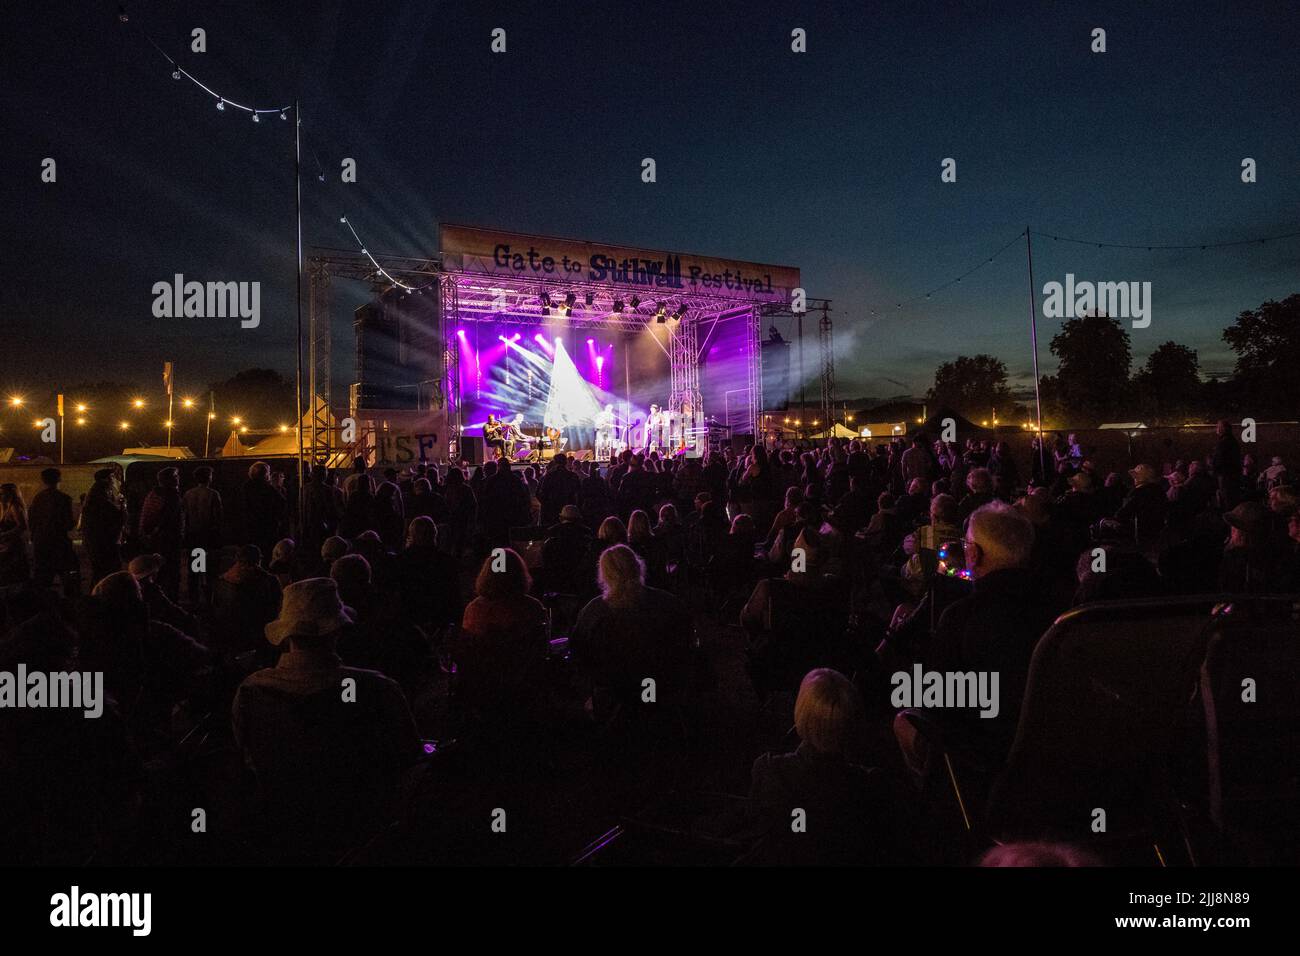 Evening at the main stage is welcome for the music lovers at the 15th. Gate to Southwell, International Roots and Acoustic Music Festival. Stock Photo